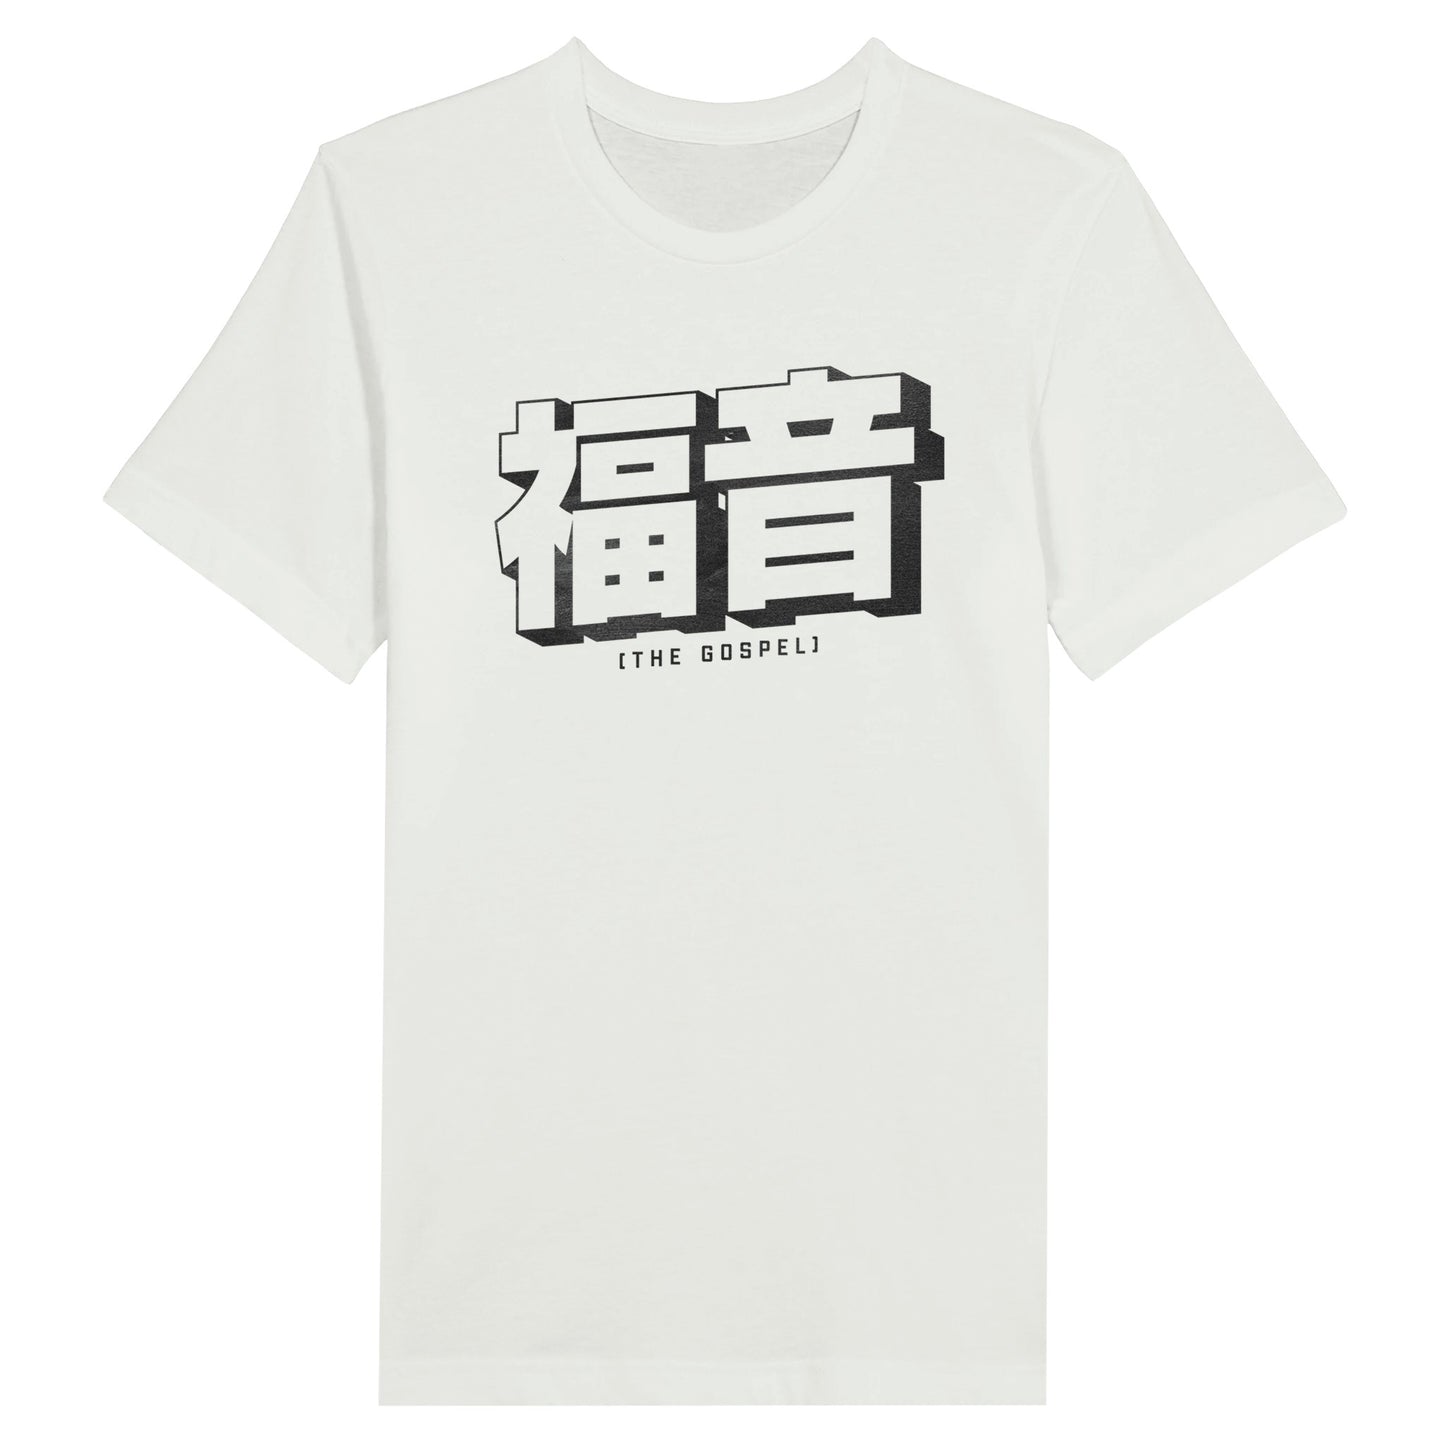 An image of The Gospel (Japanese) | Premium Unisex Christian T-shirt available at 3rd Day Christian Clothing UK